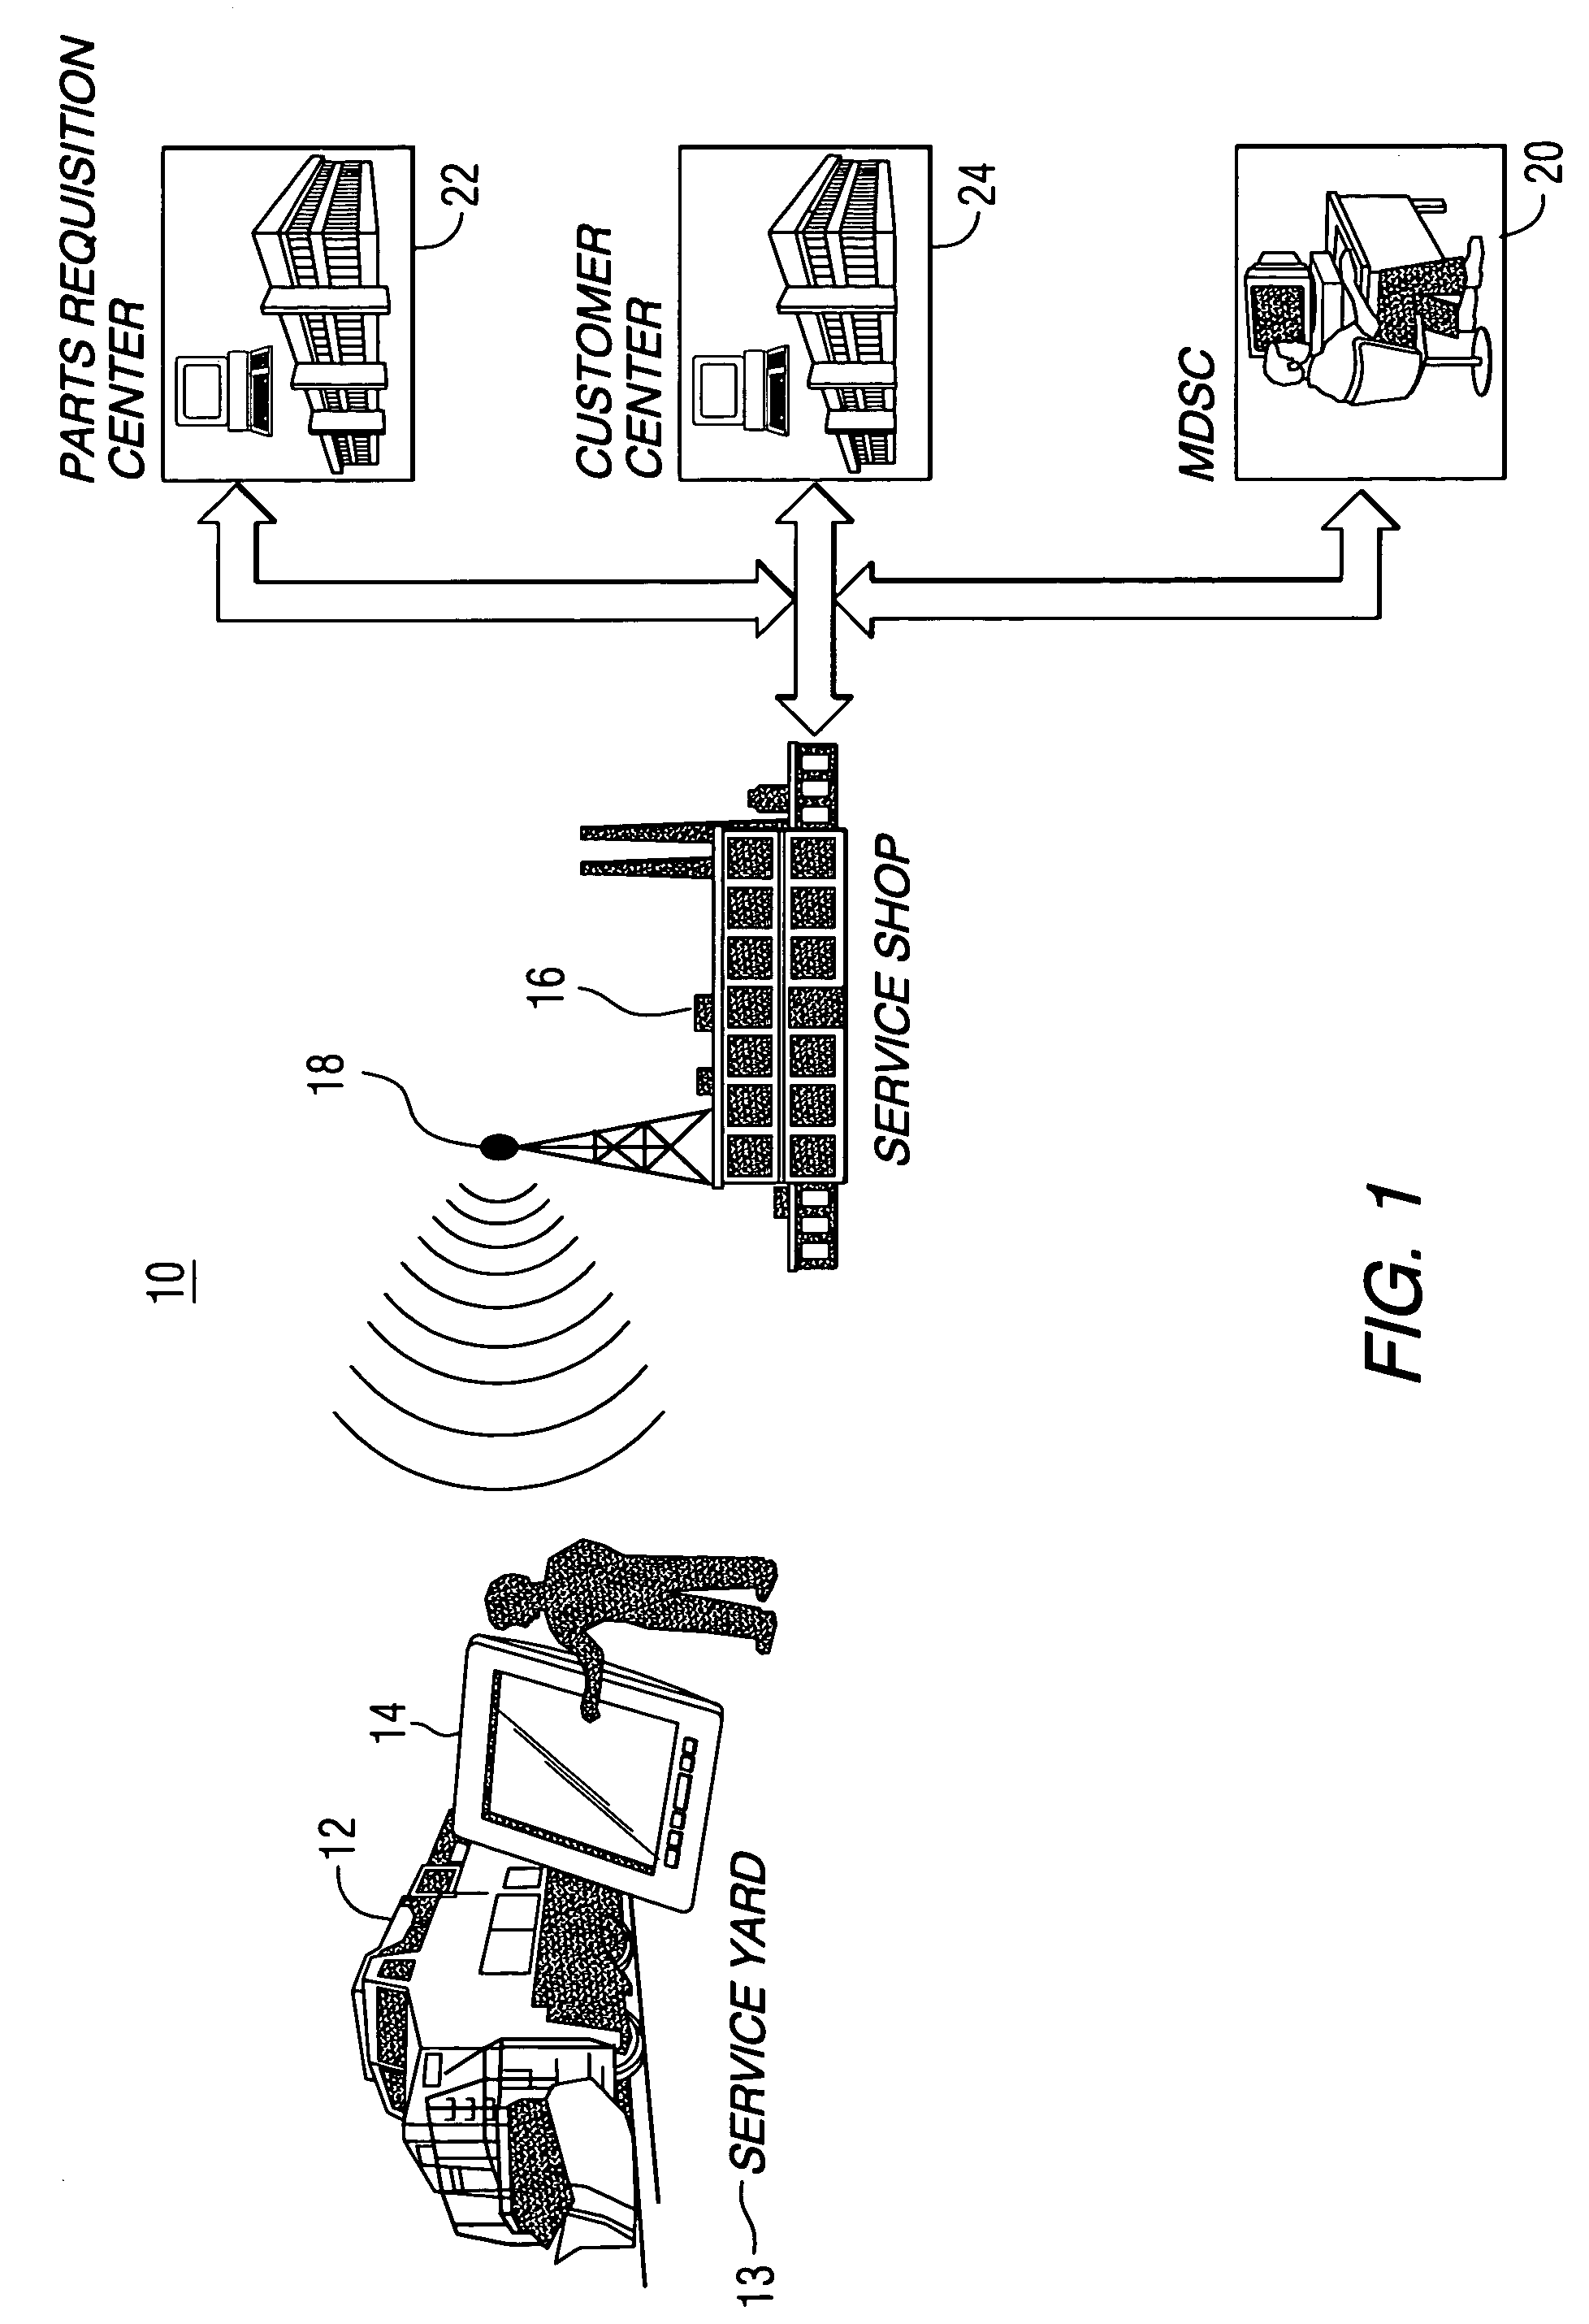 Method and system for graphically identifying replacement parts for generally complex equipment